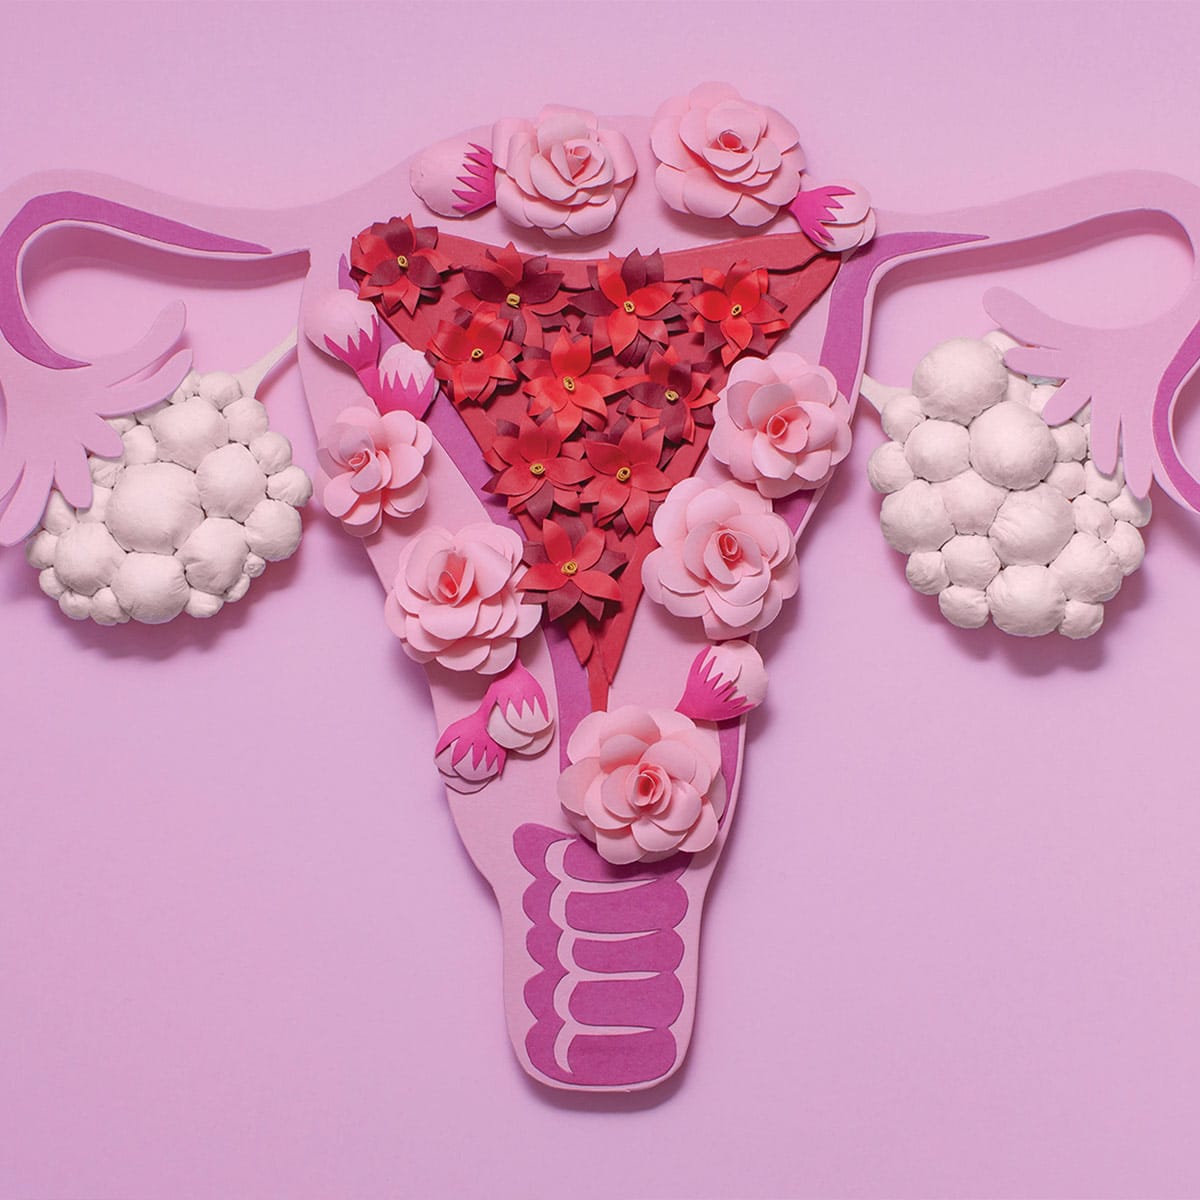 depiction of uterus made out of materials with pink background